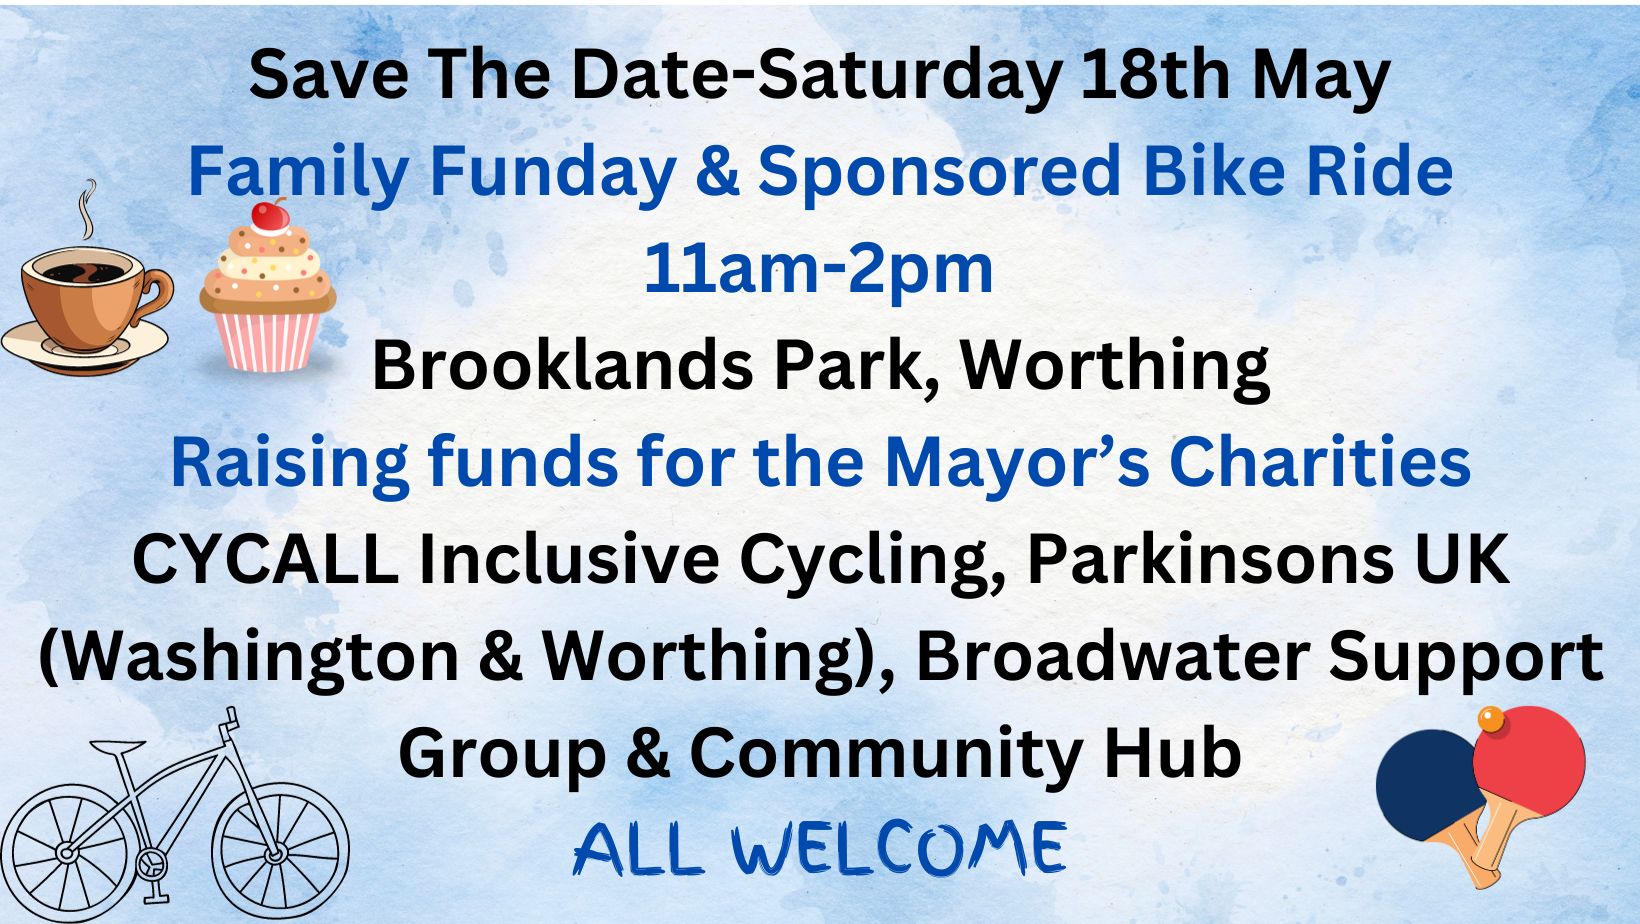 Family Funday and Sponsored Bike Ride